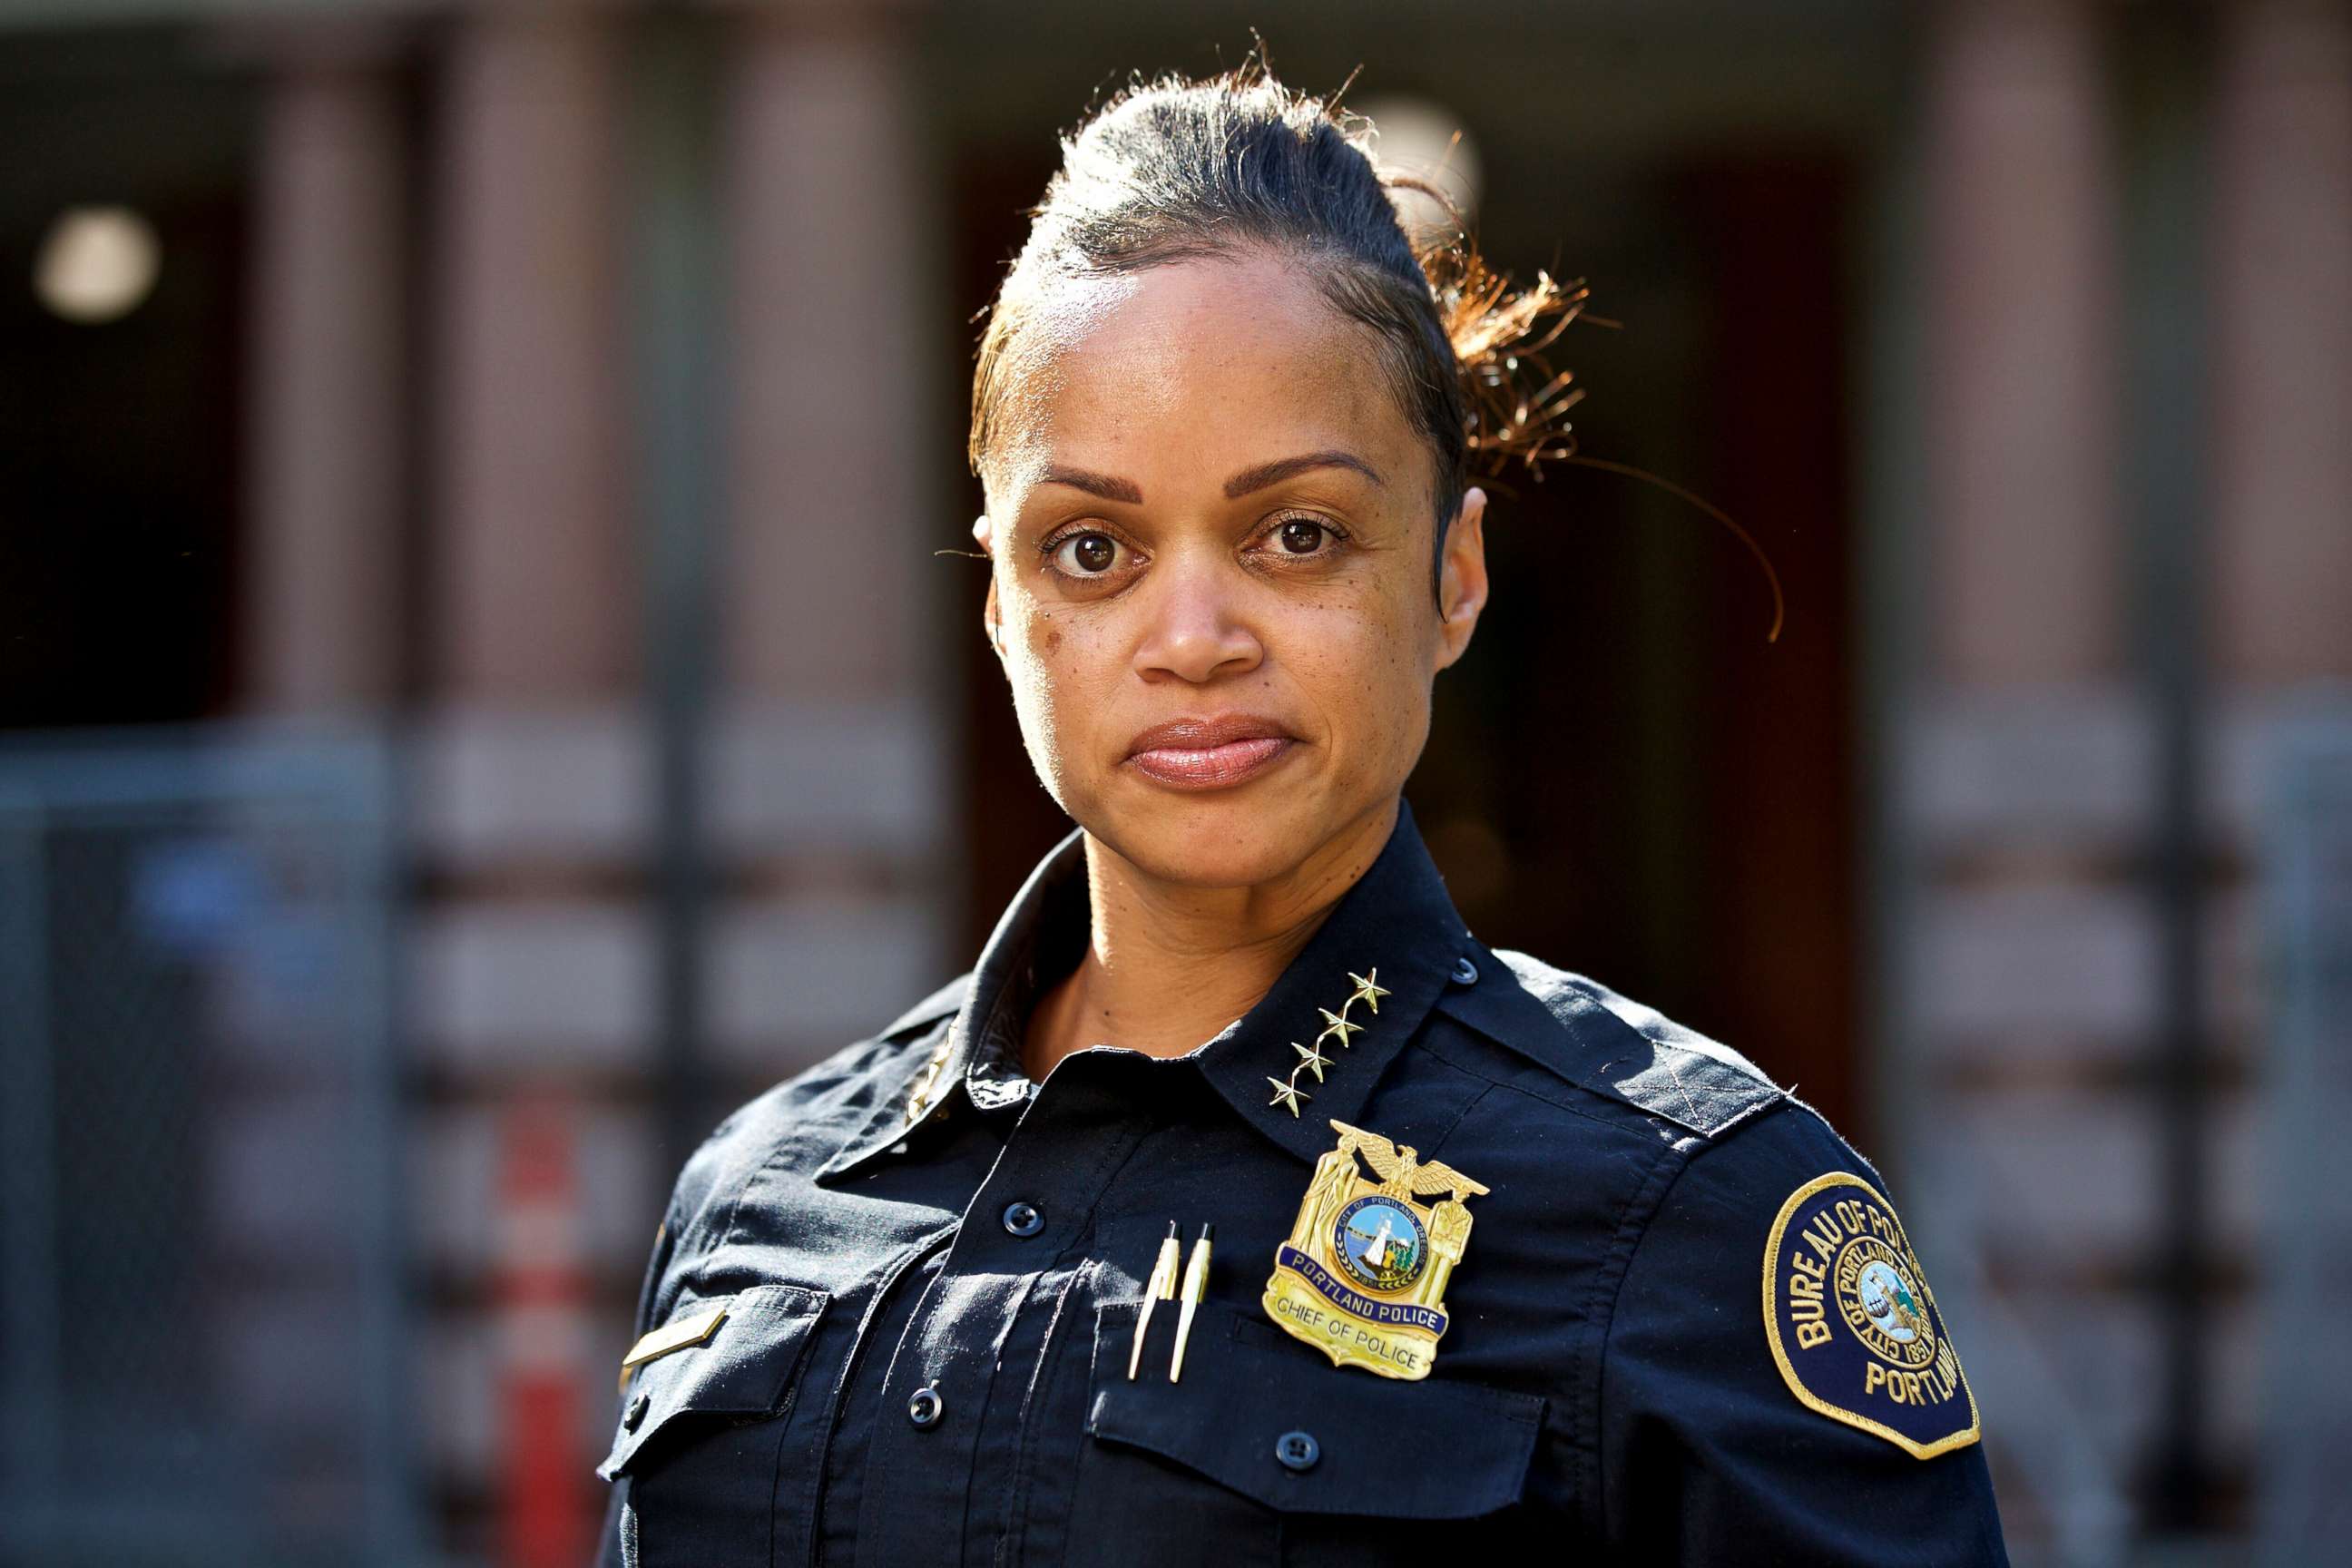 PHOTO: Portland Police Chief Danielle Outlaw poses for a photo in Portland, Ore. Outlaw was named  the new Philadelphia police commissioner.